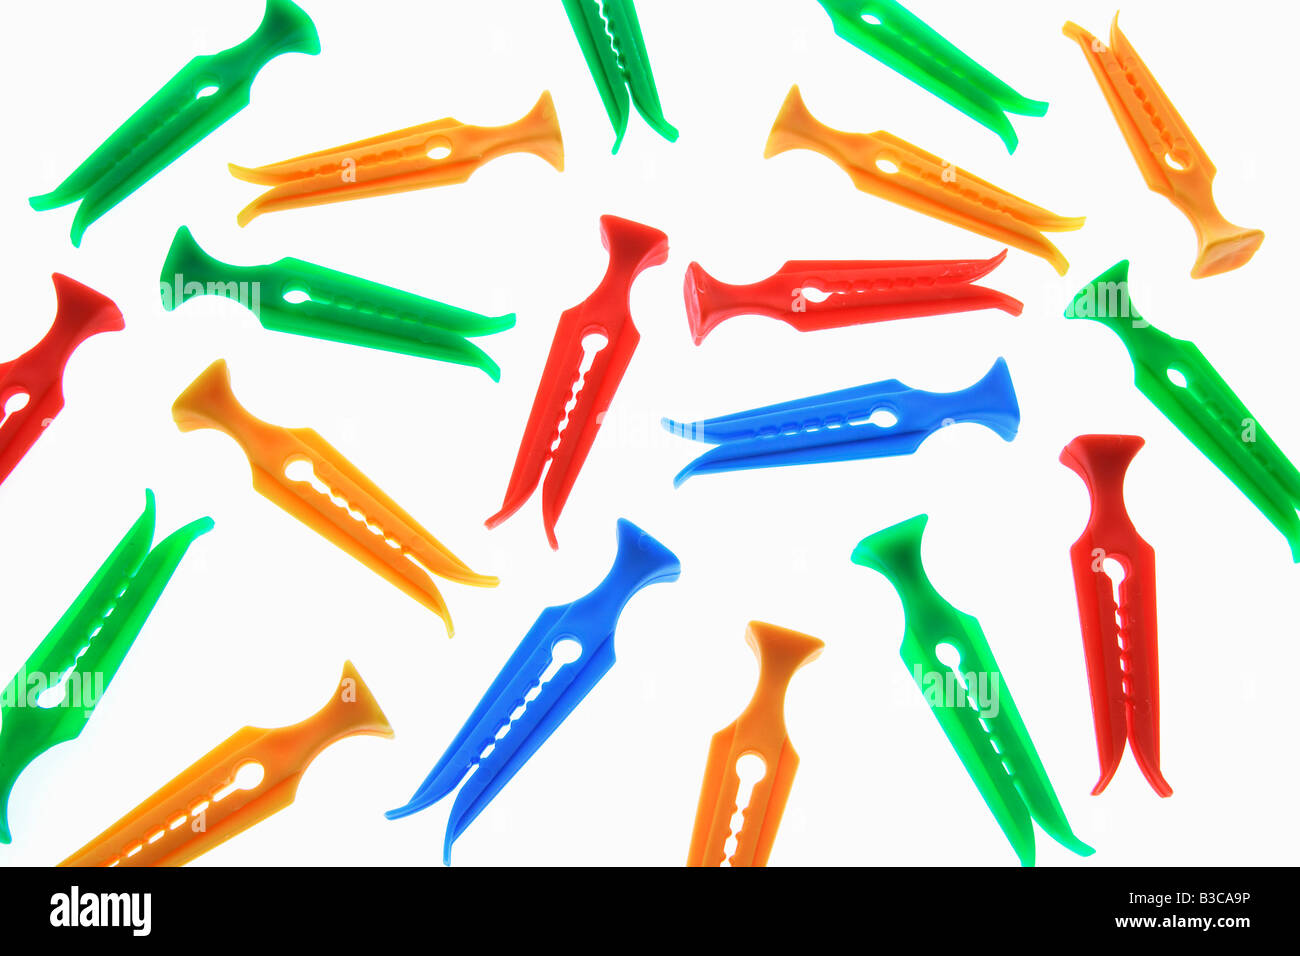 Plastic Clothes Pegs Stock Photo